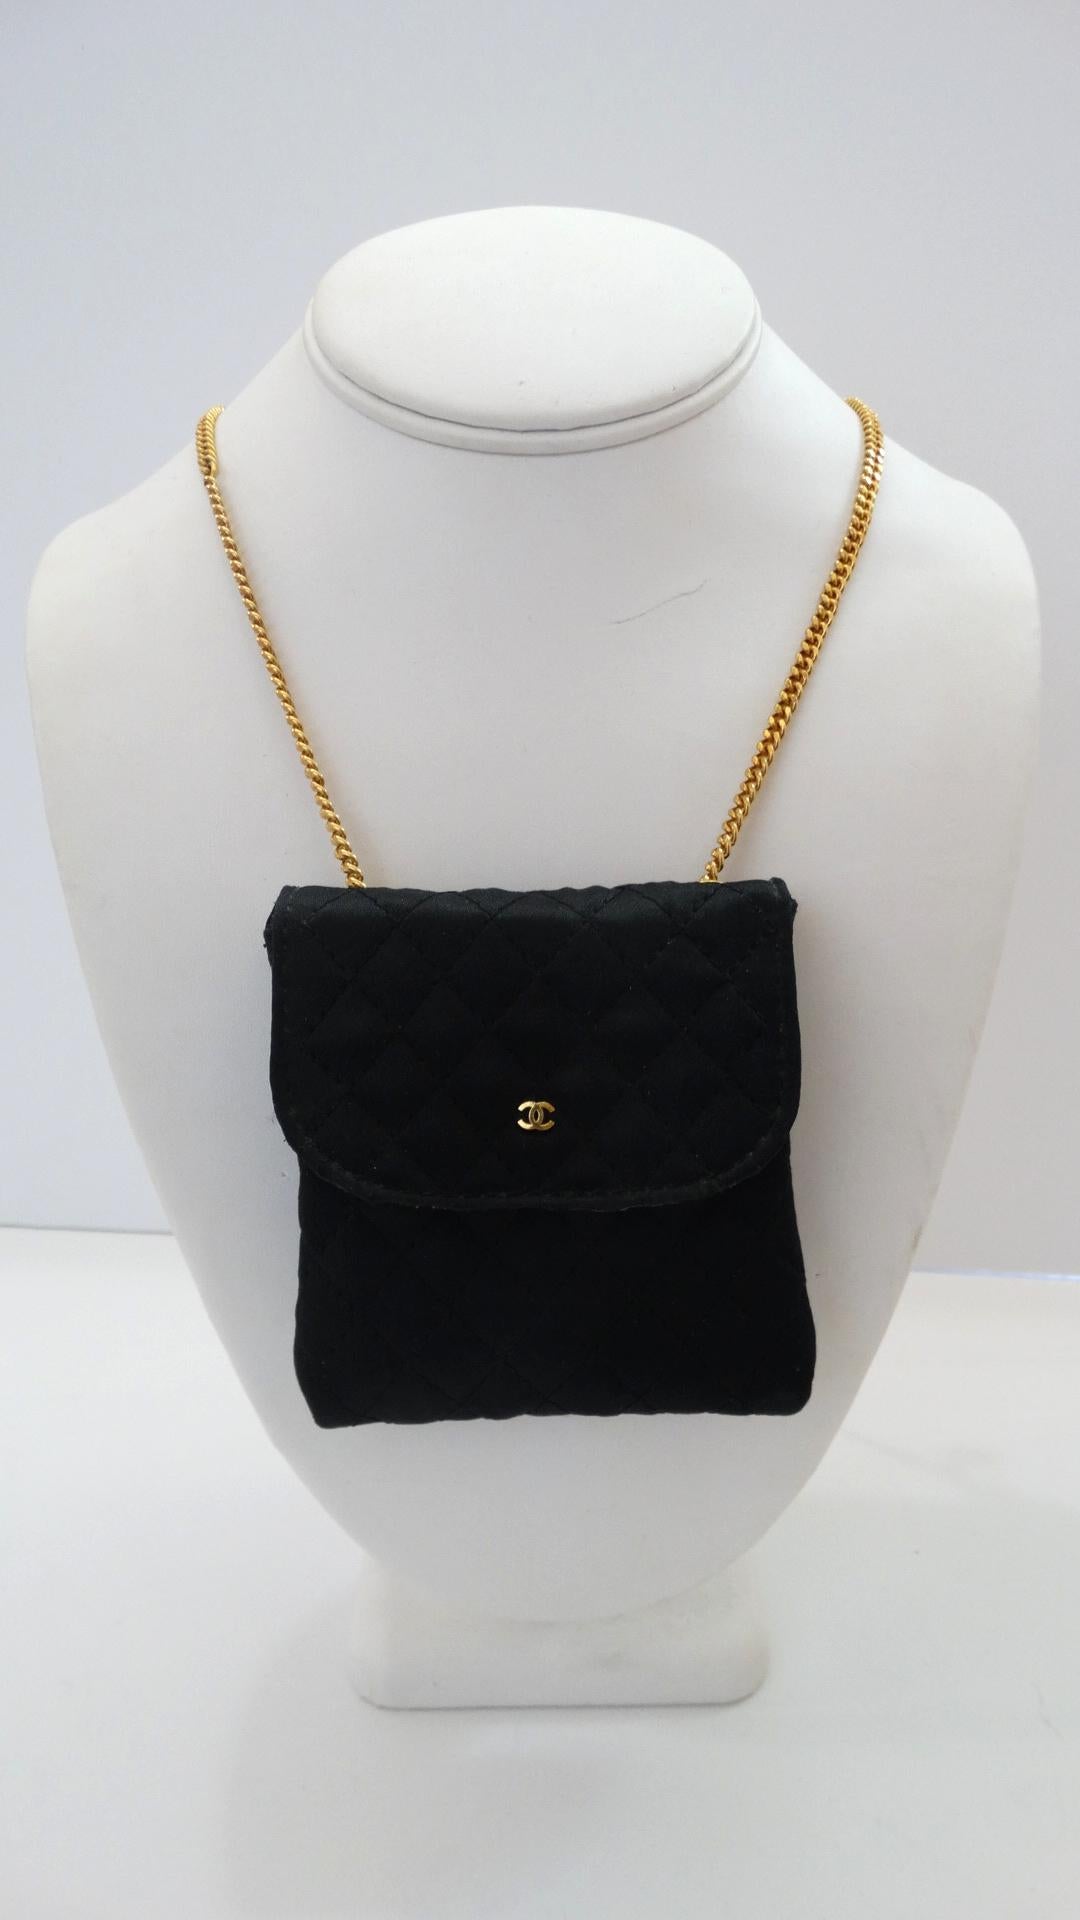 Mini bags are so en vogue! Rock the tiny-pouch trend seen all over the runways this past season with our vintage Chanel satin necklace bag! Constructed from black satin with Chanel's signature quilted stitching. Miniature gold 